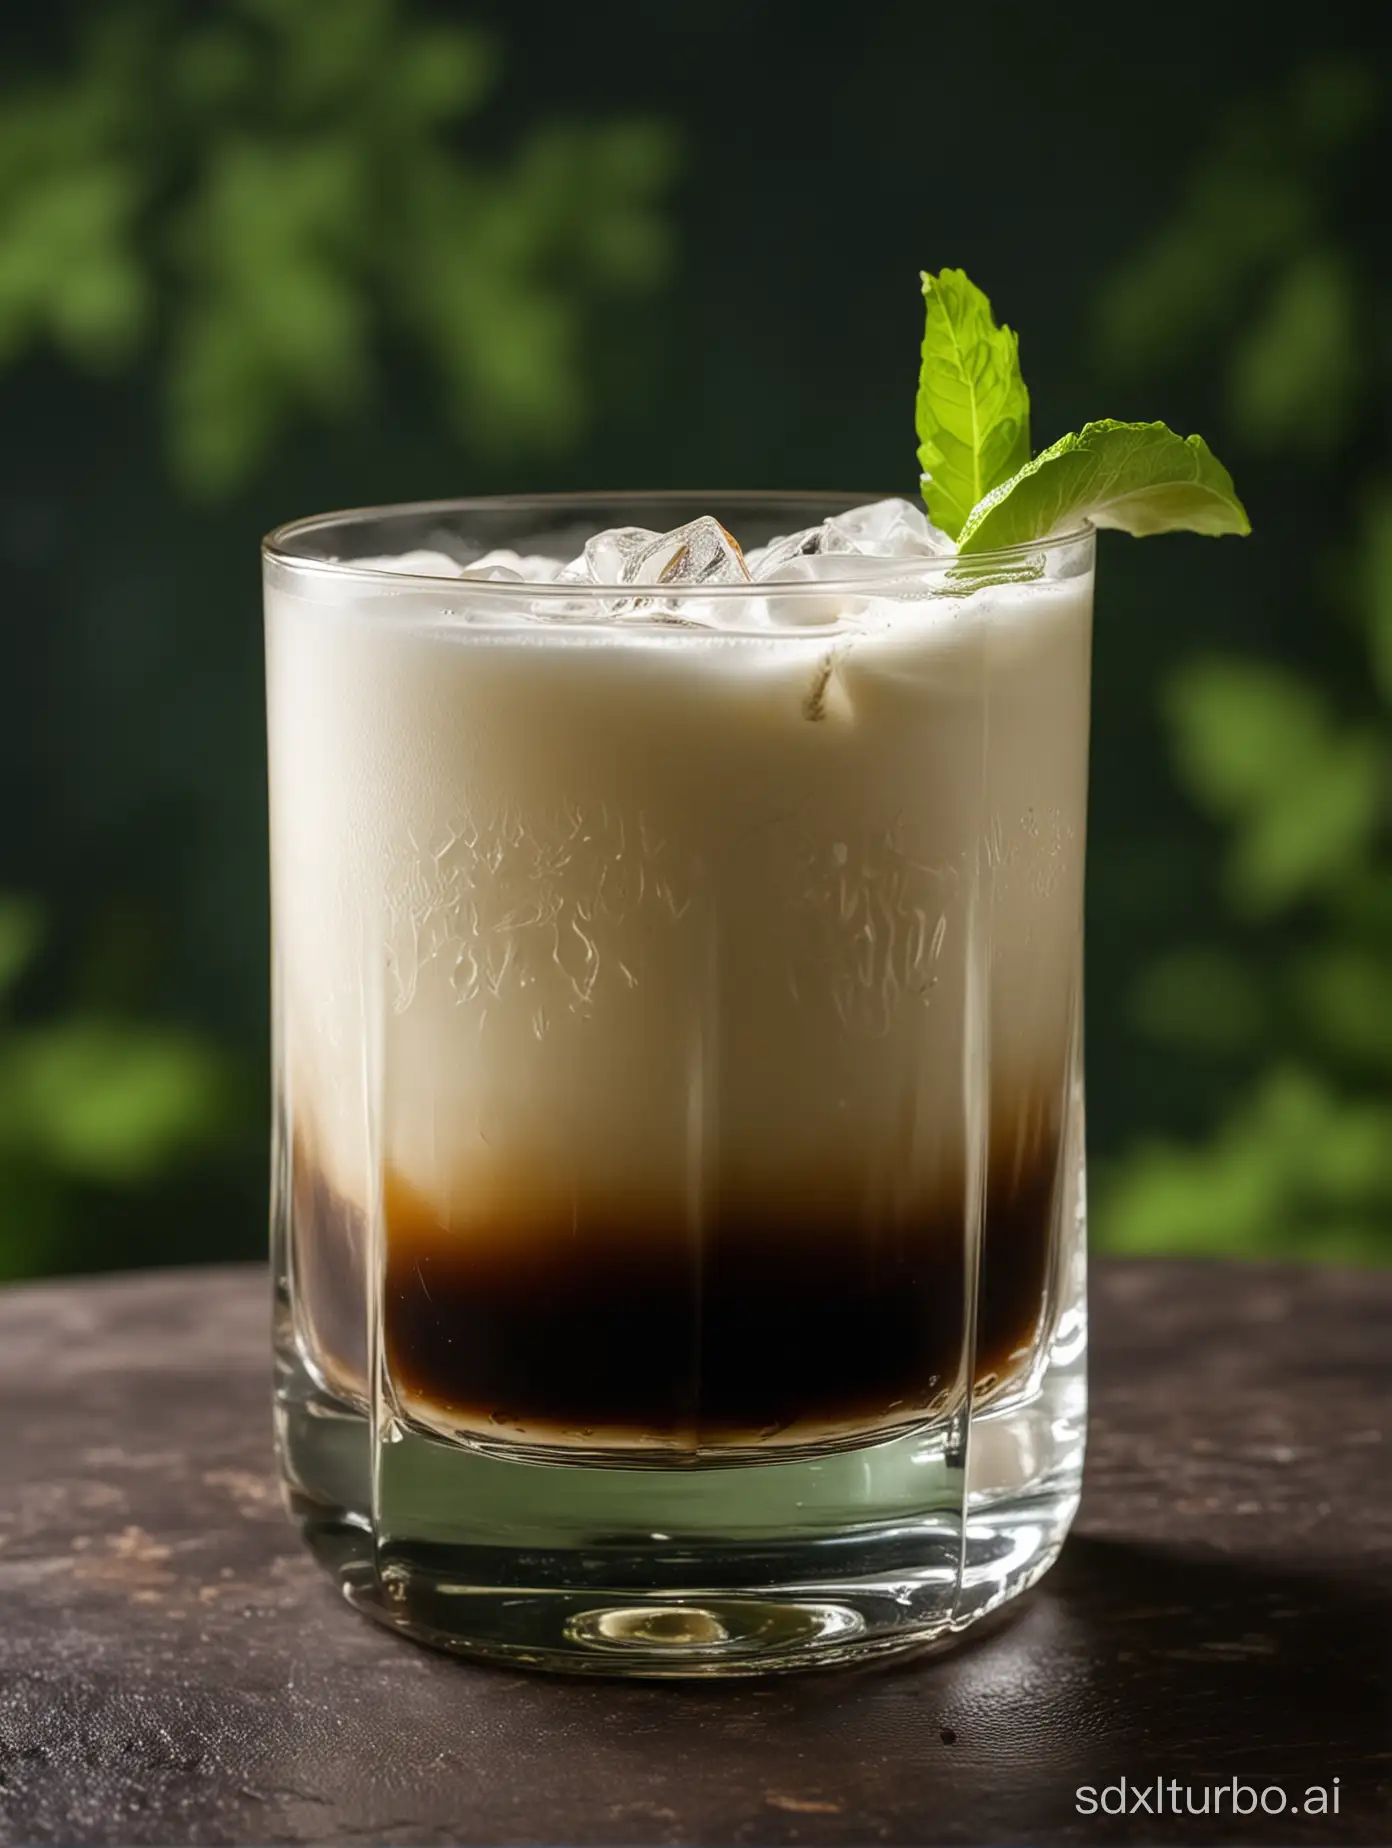 a glass of white russian, on the table, at night, green background